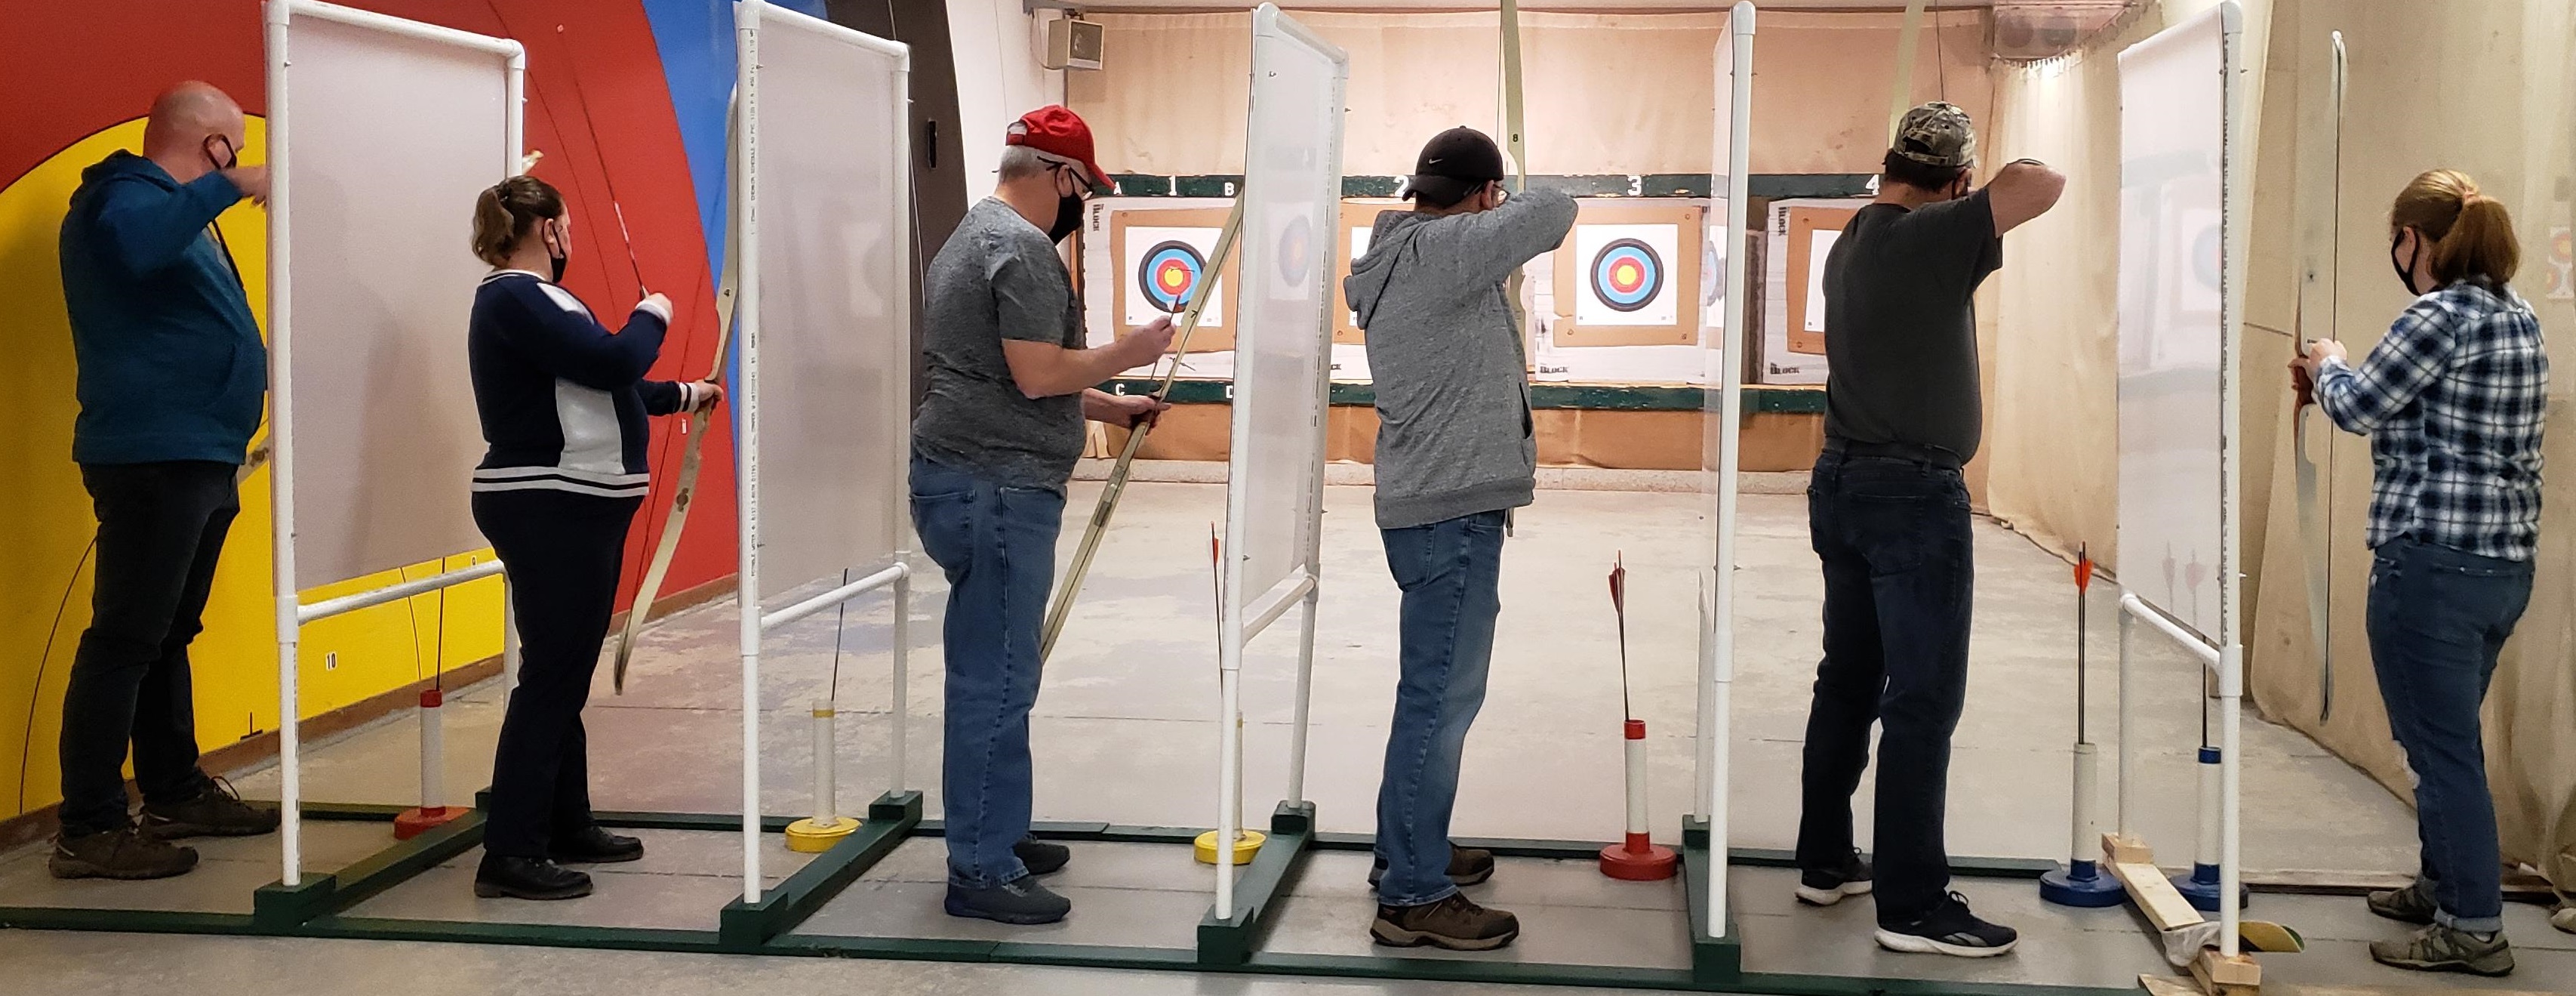 Introduction to Archery in Petawawa, ON Image